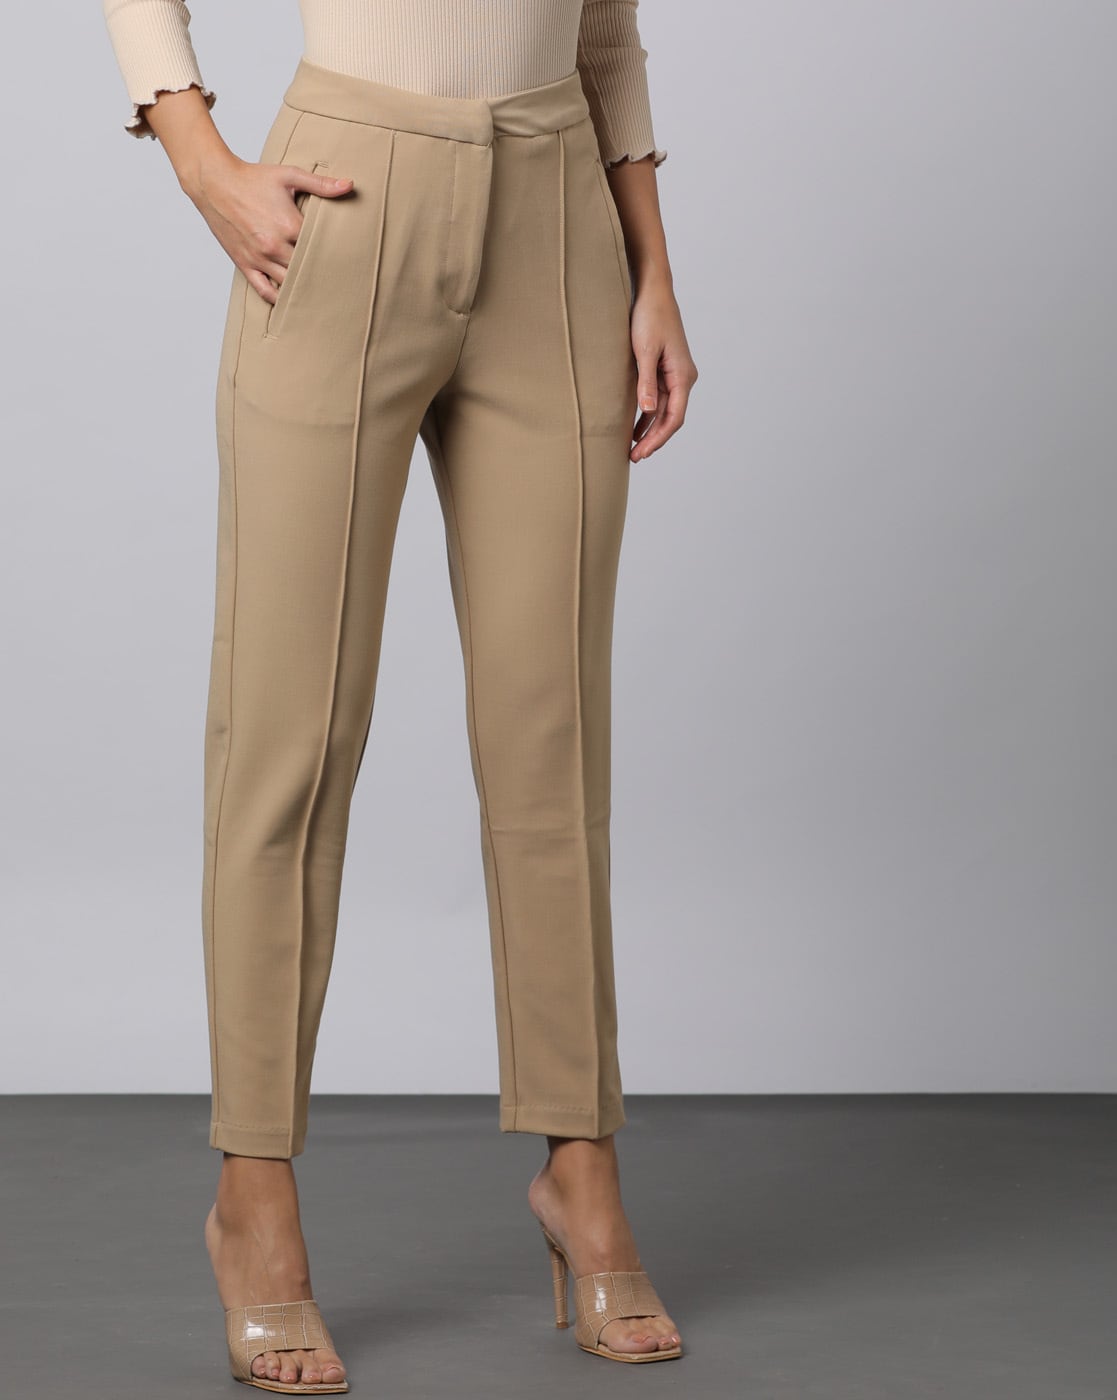 Madame Tan Trousers  Buy COLOR Tan Trouser Online for  Glamly